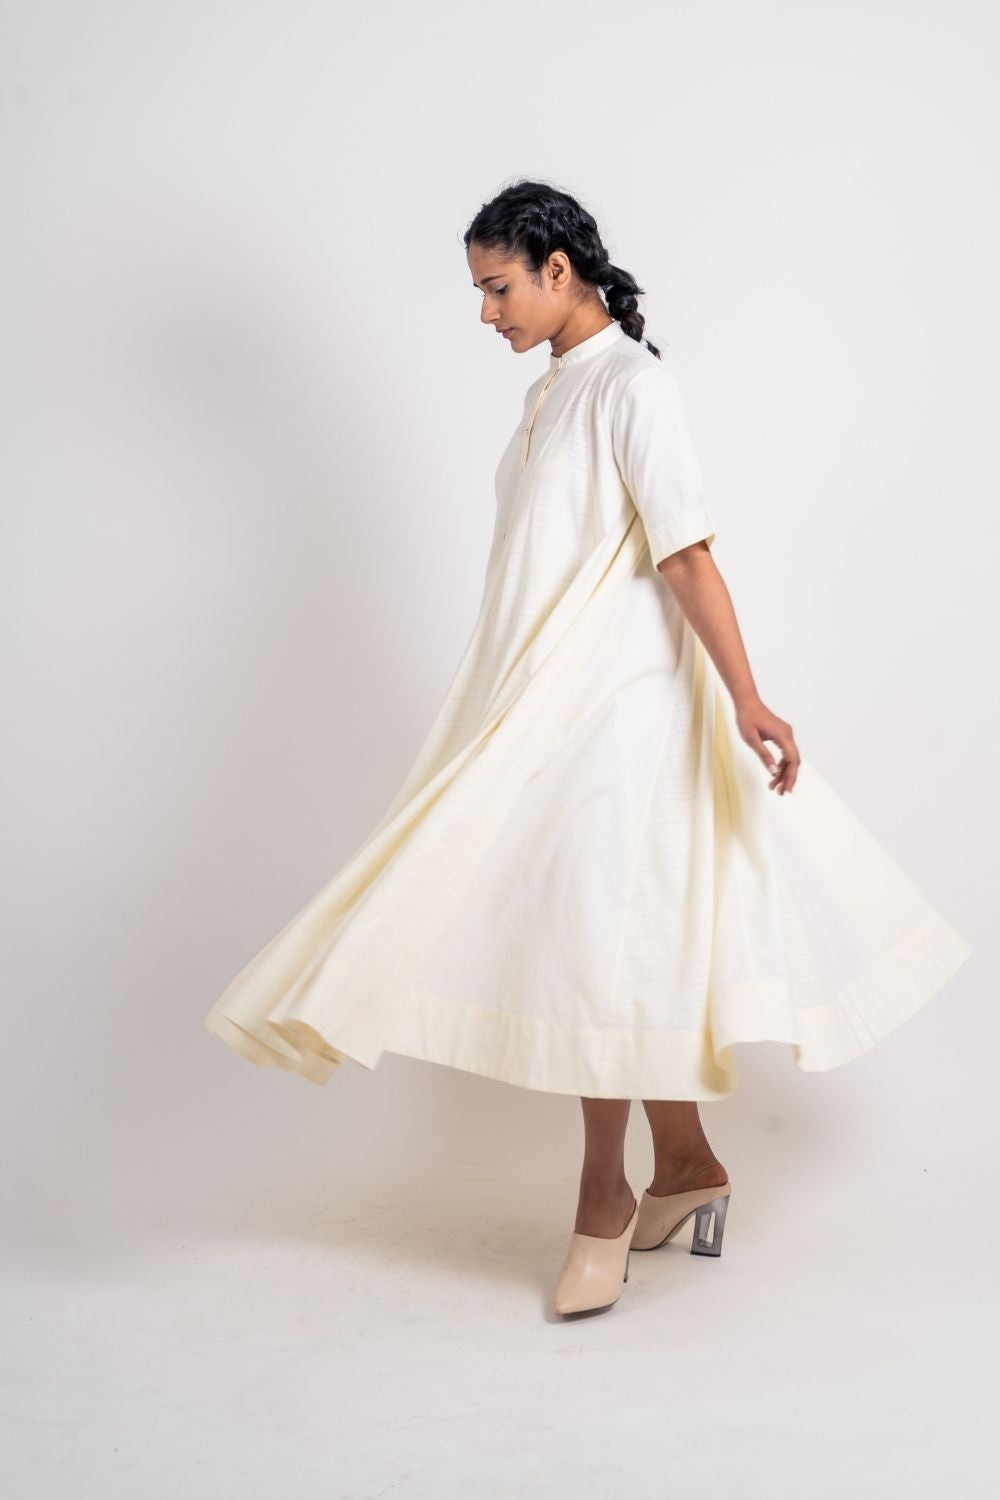 White Cotton Midi Dress Dresses Handloom Cotton, Dresses, Natural, Relaxed Fit, Solids, Ahmev Kamakhyaa